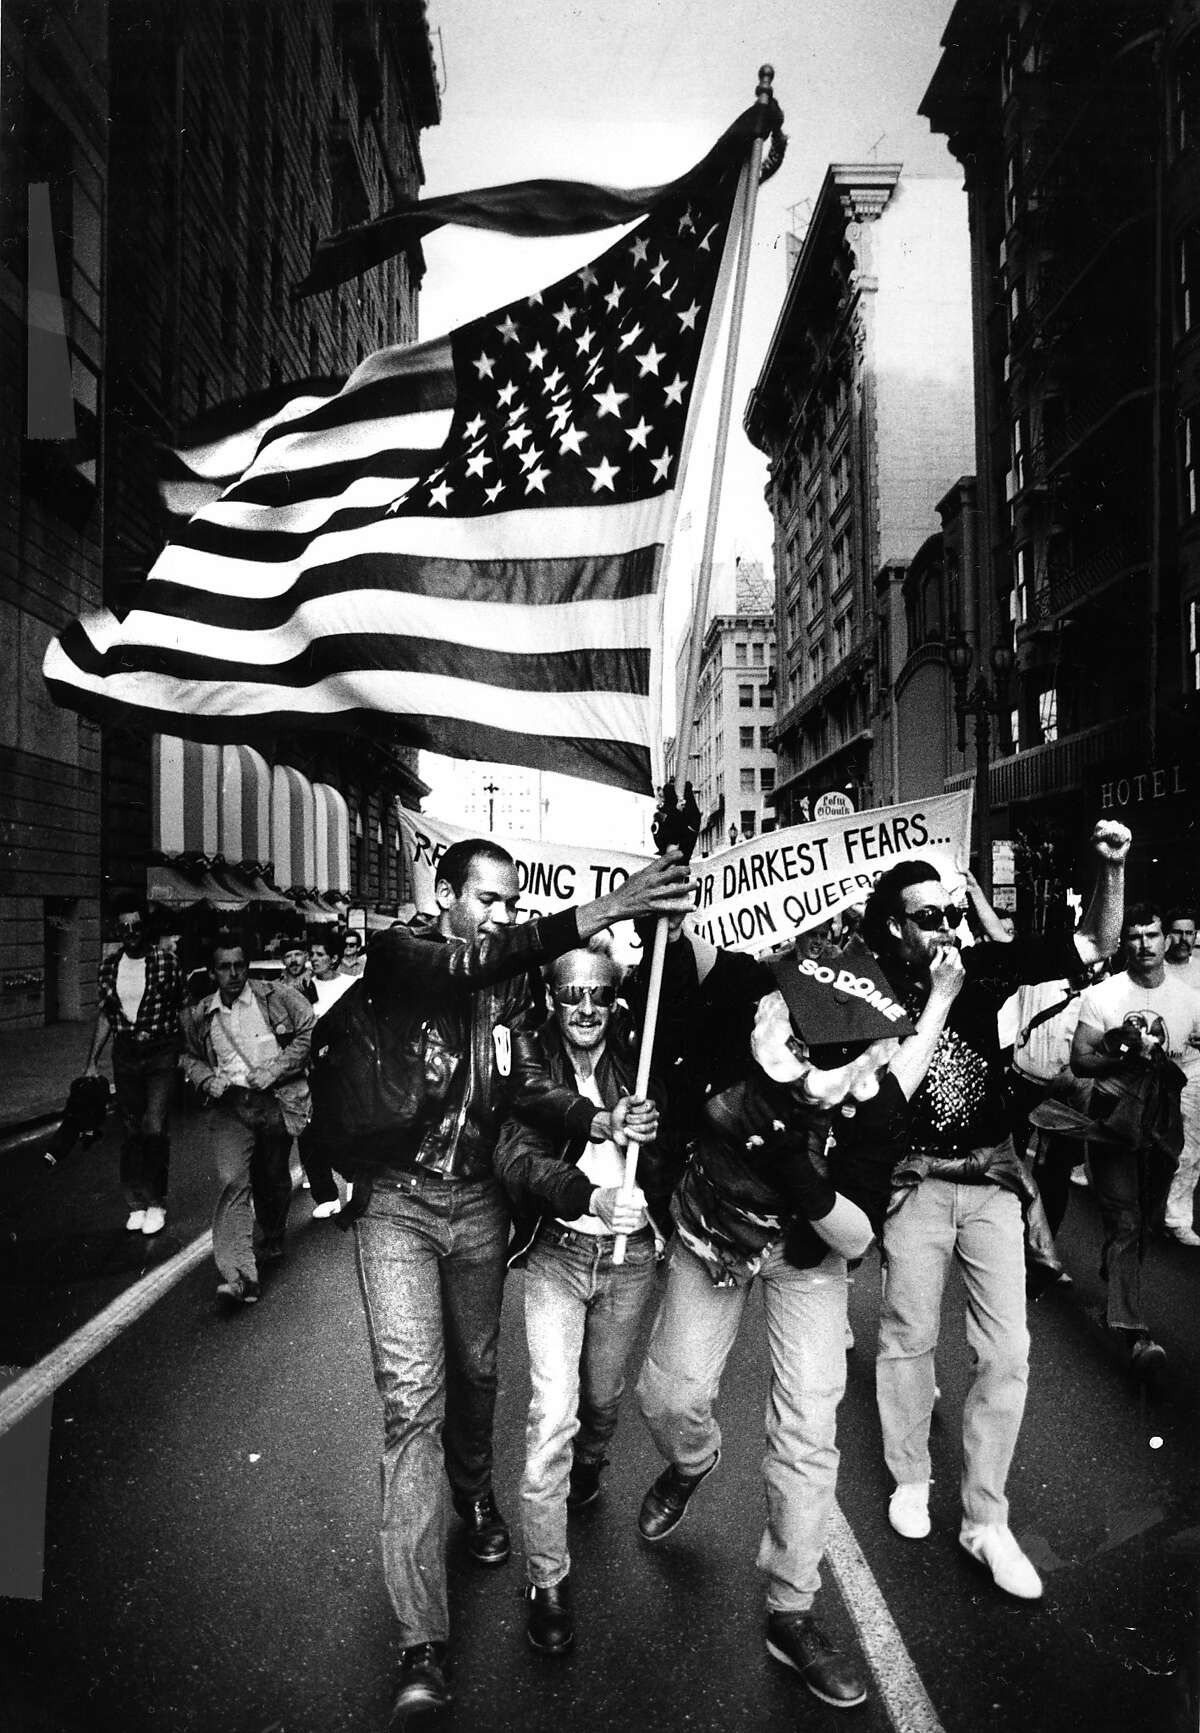 July 17, 1986: Member of San Francisco's gay community protest the Supreme Court's decision to uphold an anti-sodomy law in Georgia.